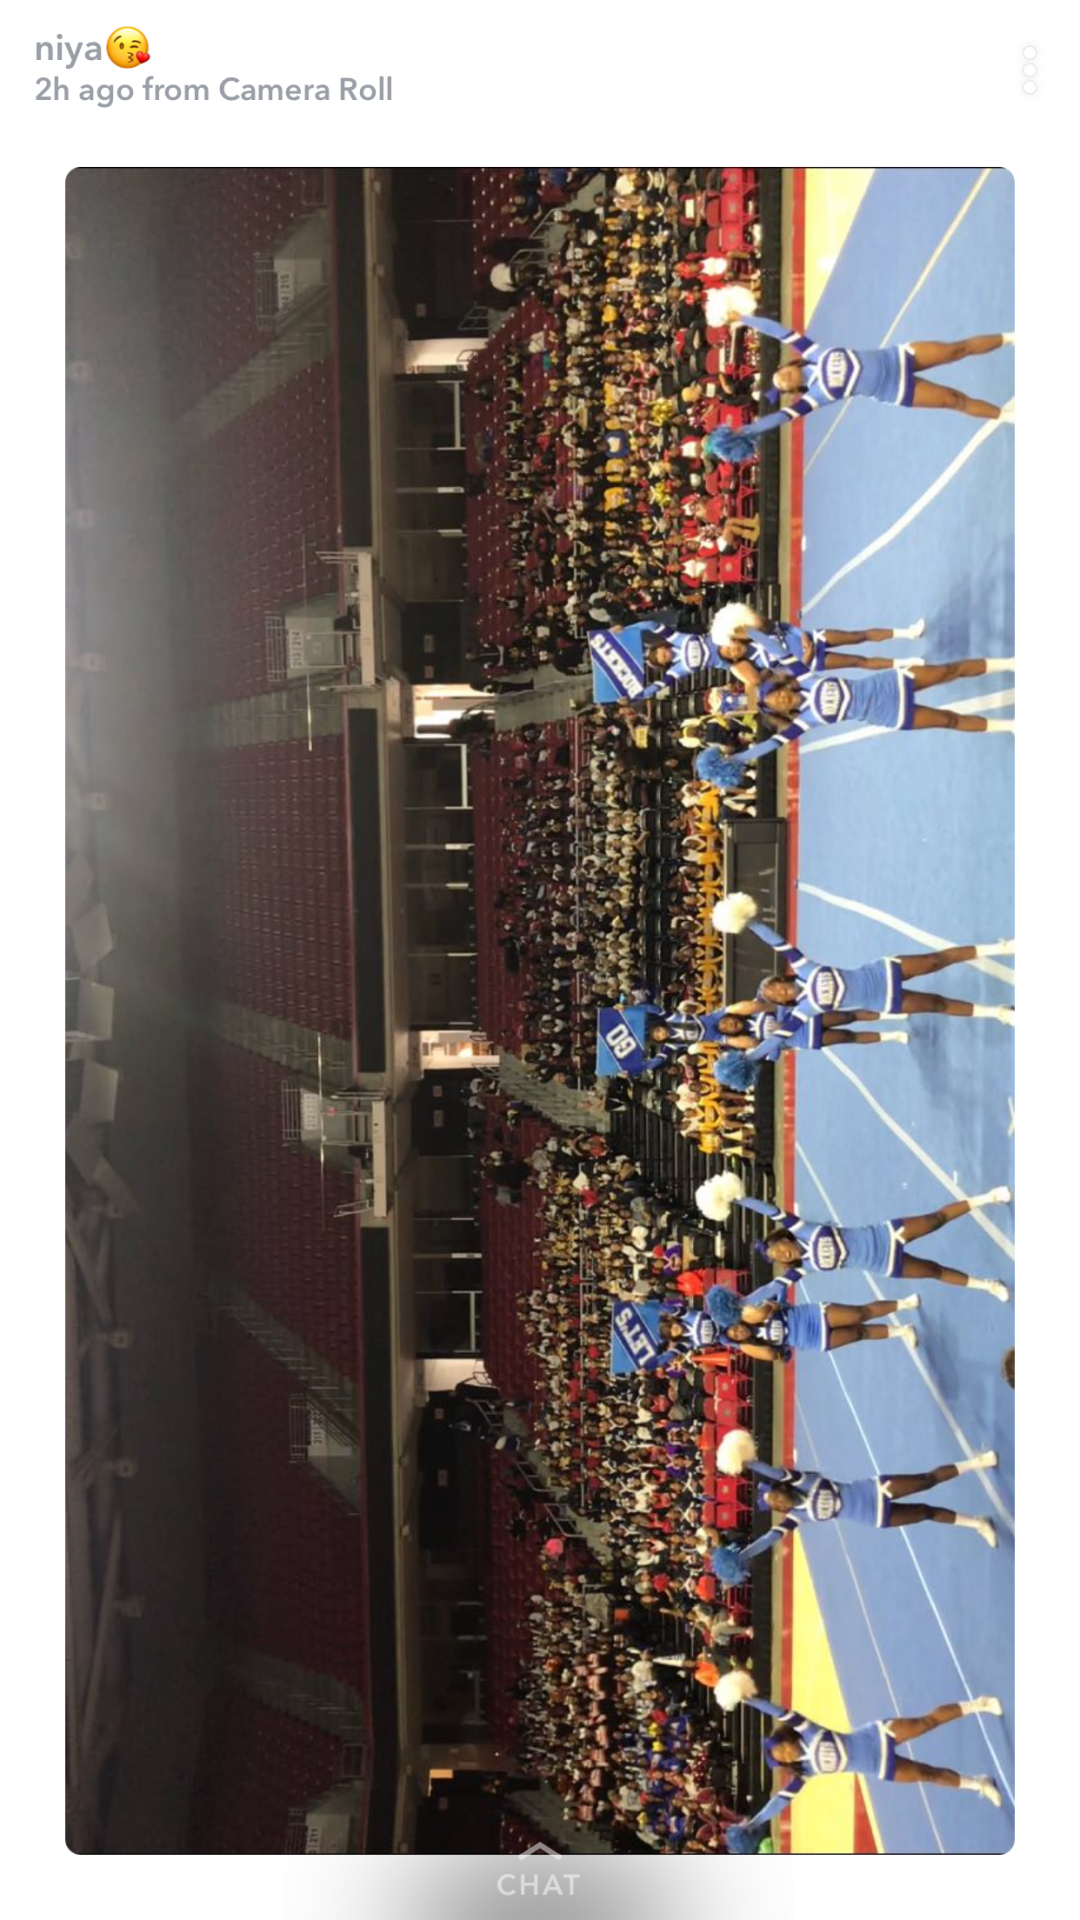 This was our cheerleading competition for the Philadelphia Districts competition where we took home 2nd place.